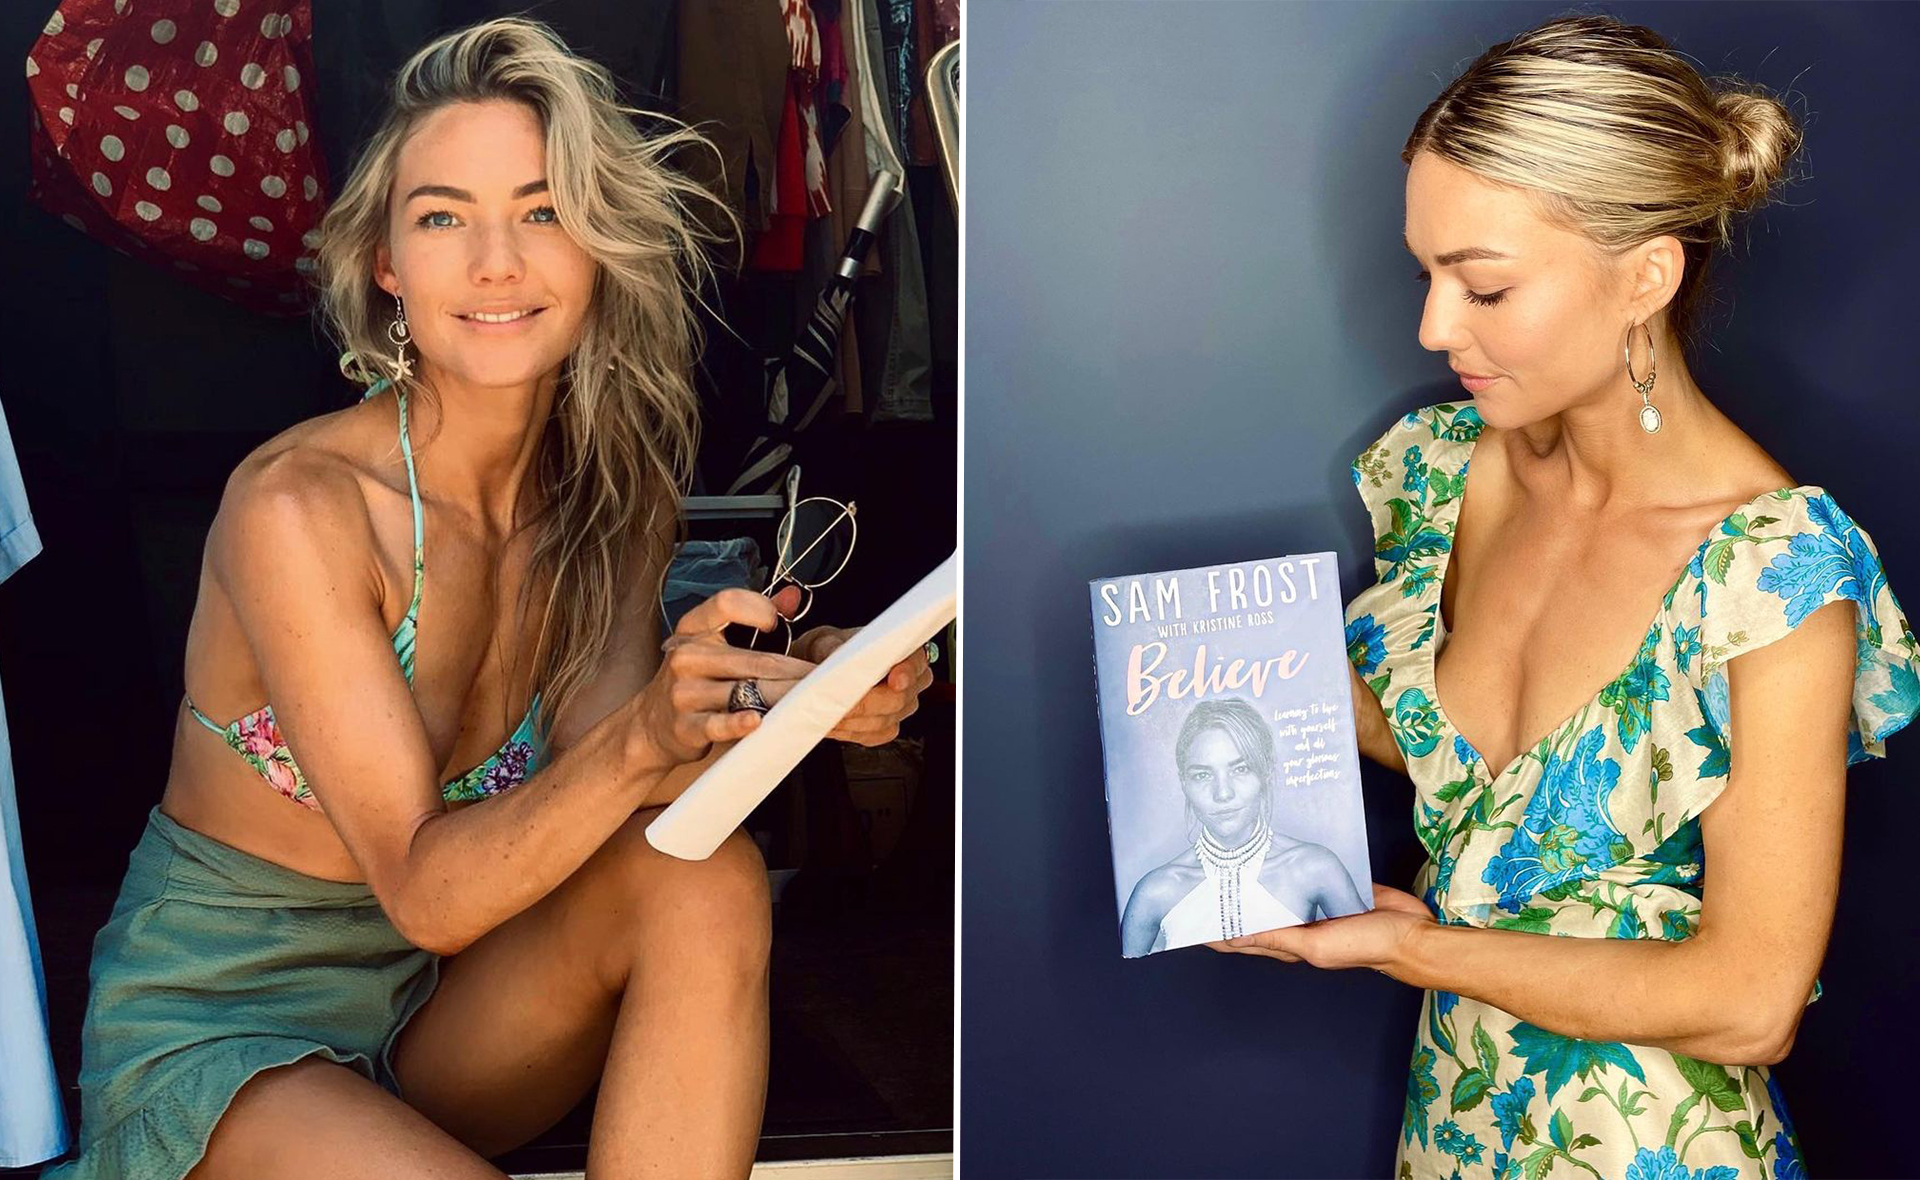 Home and Away star Sam Frost has written a book about mental health after opening up about her anxiety battle: “I know what it feels like to lose all hope”